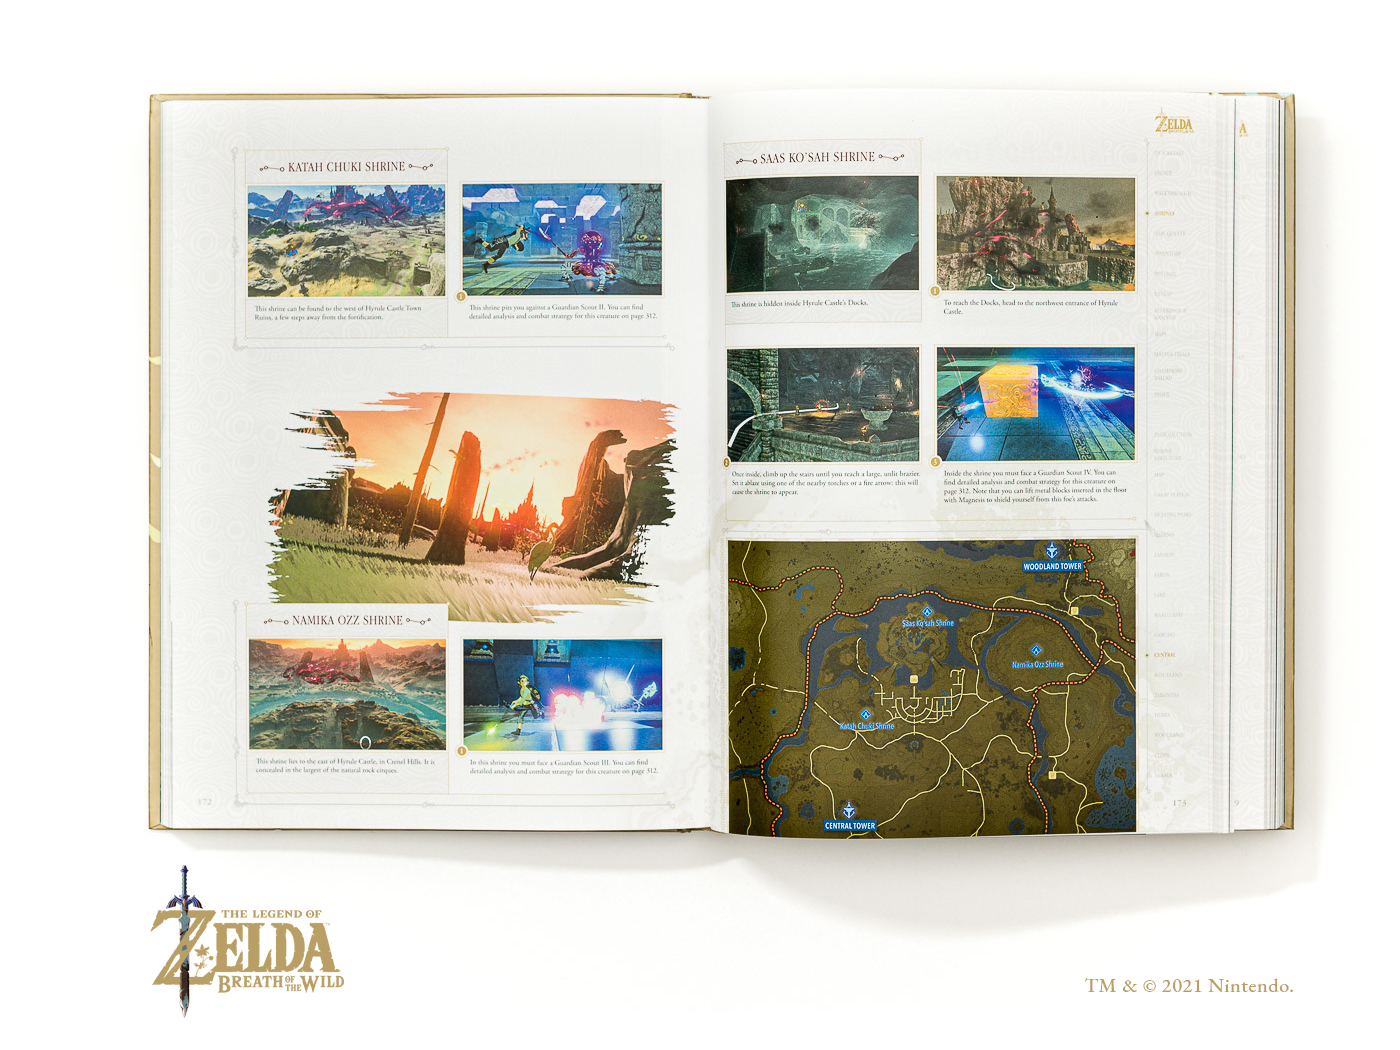 Piggyback on X: The first 100 pages of The Legend of Zelda: Breath of the  Wild Expanded Edition guide are available now for free at   Enjoy! #Zelda #BreathoftheWild #Nintendo   /